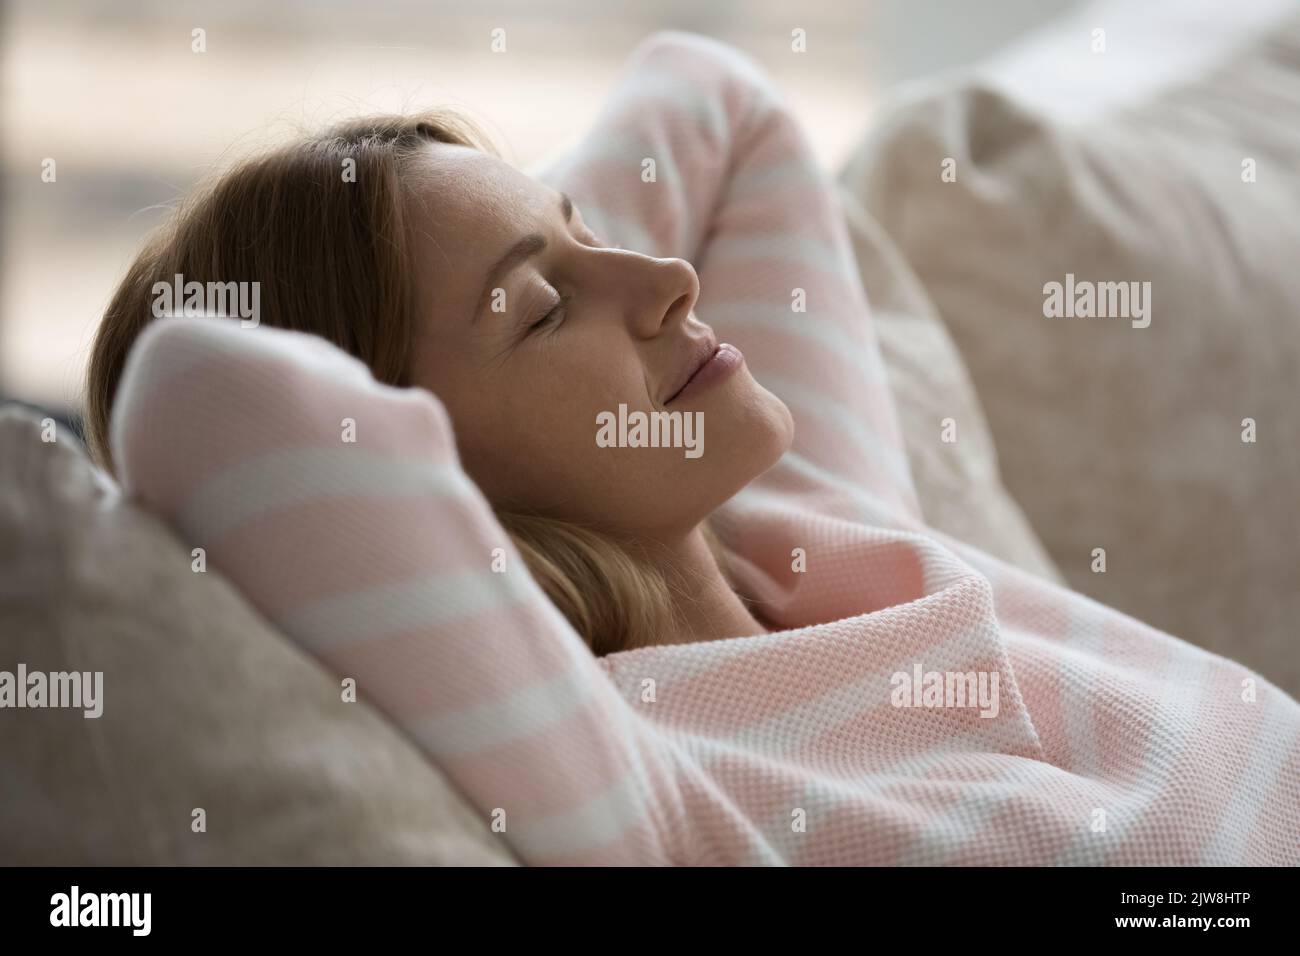 Calm sleepy Caucasian woman relaxing on soft couch Stock Photo